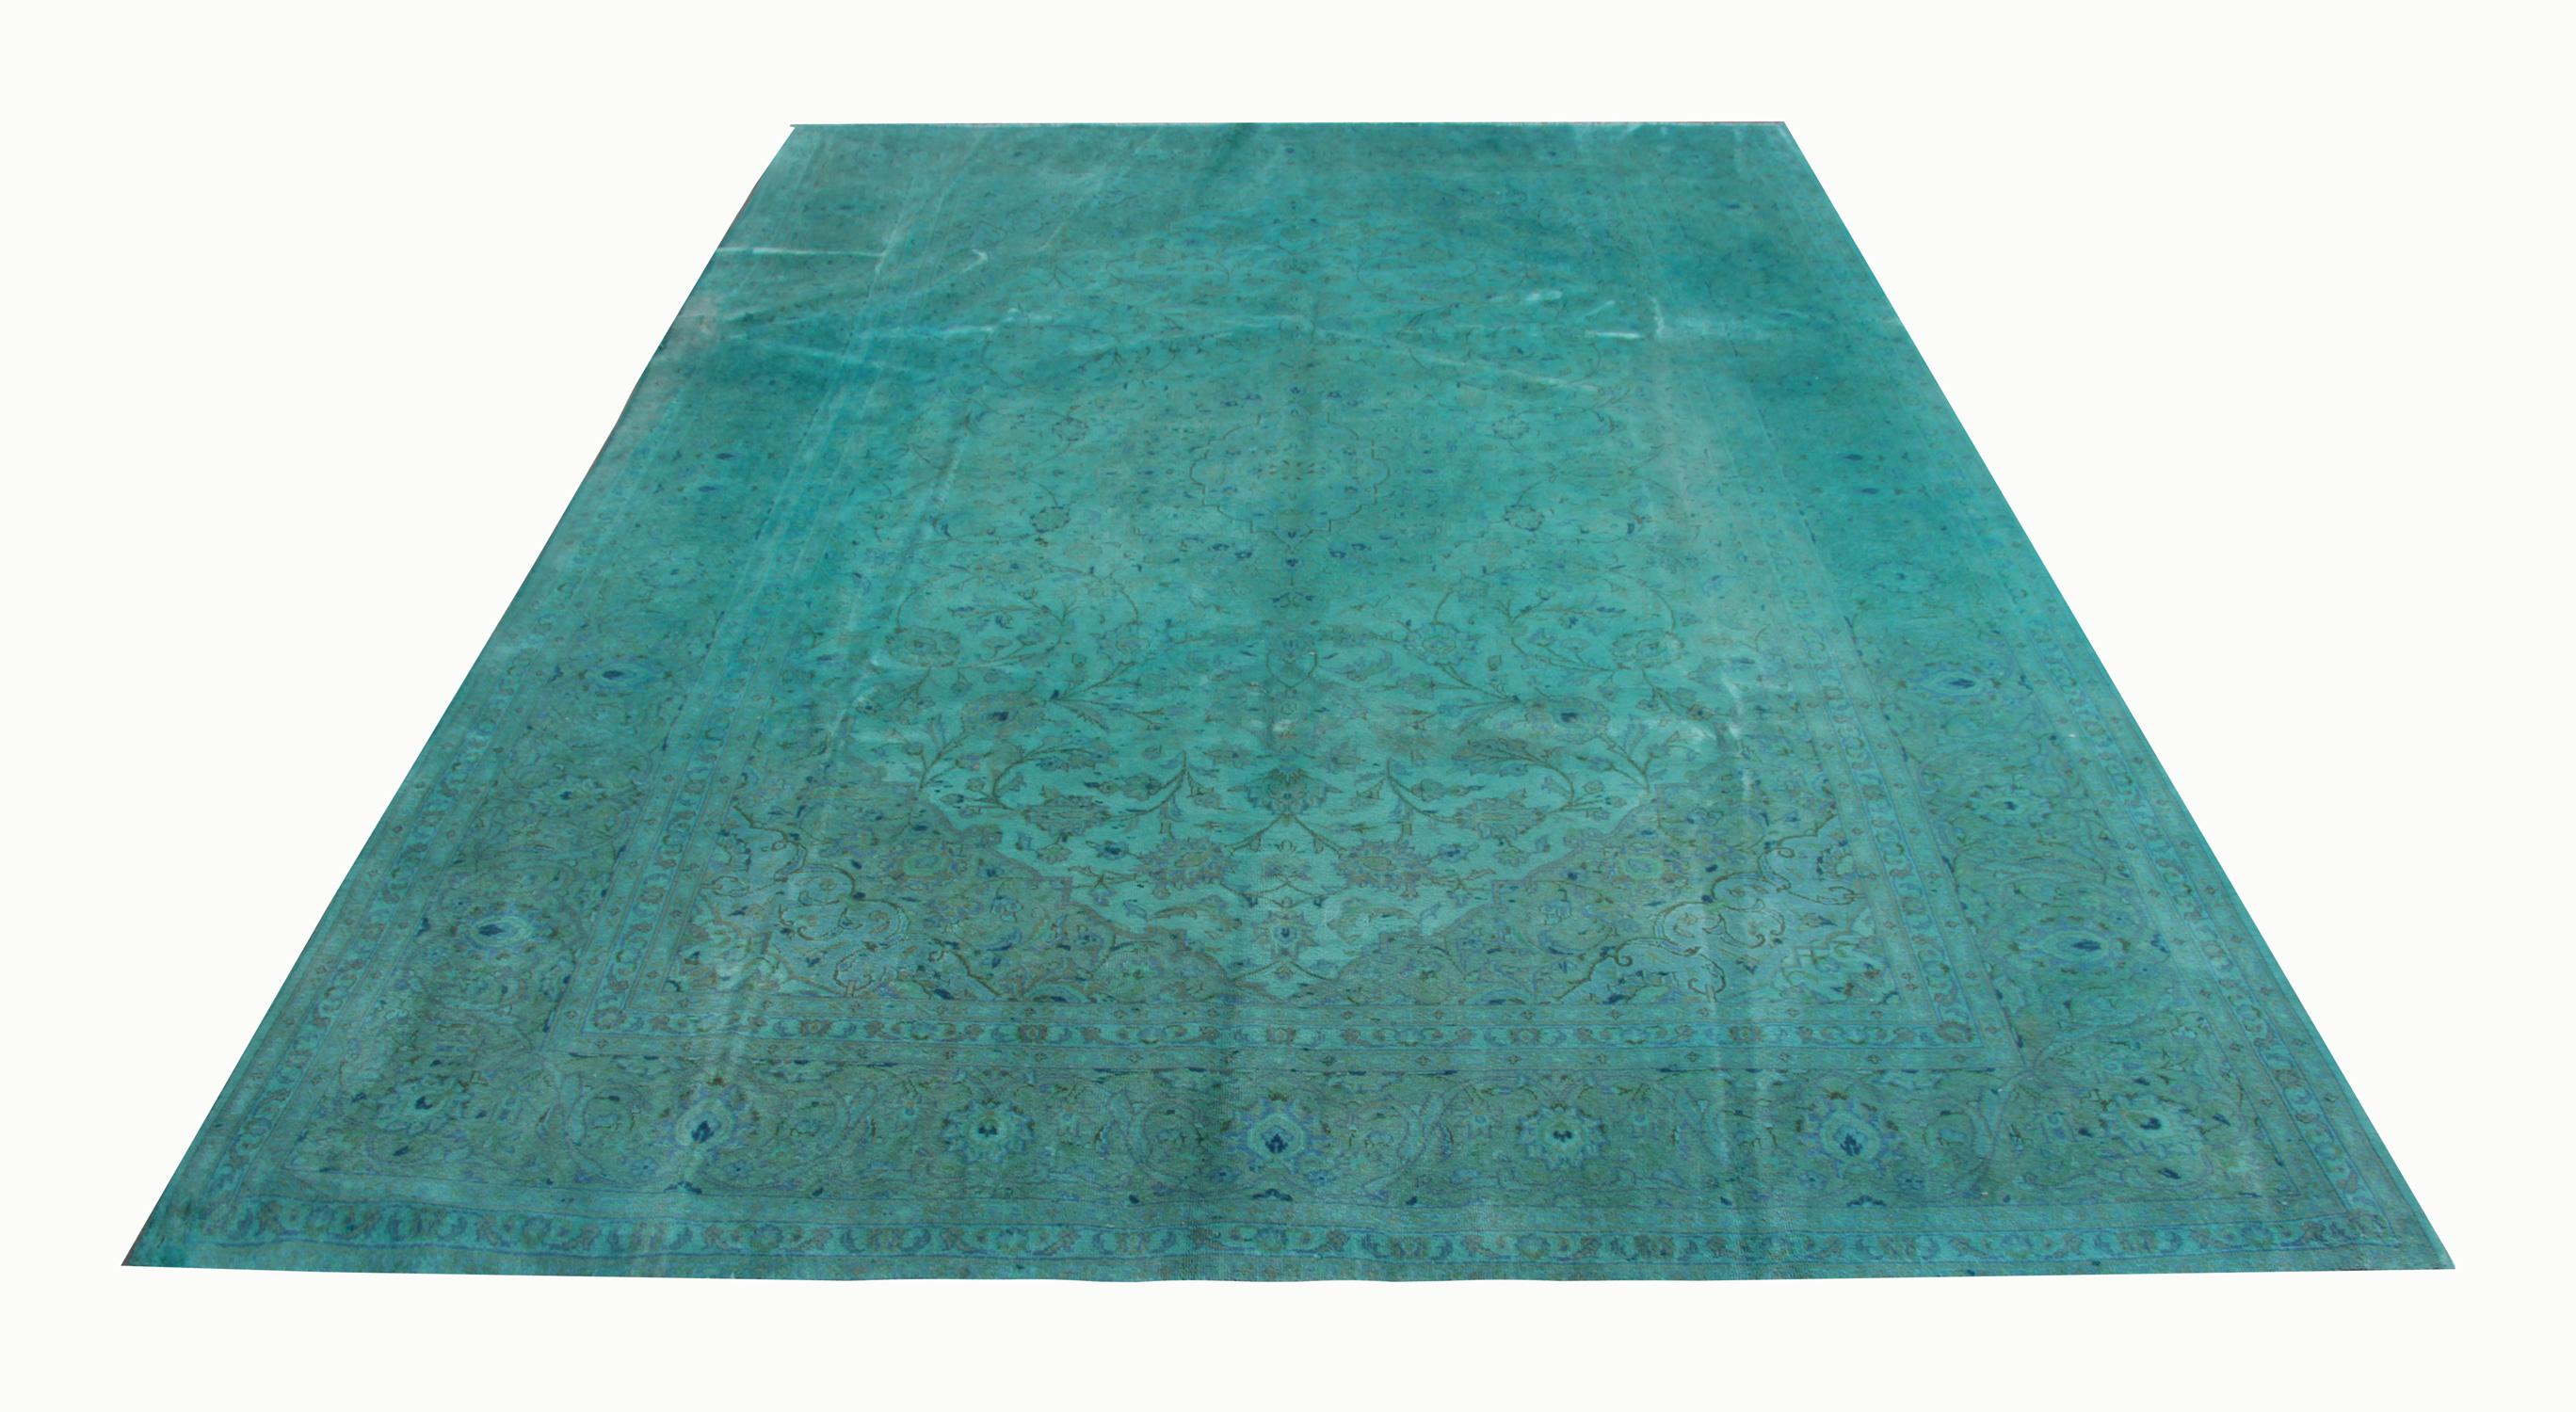 This handmade carpet oriental rug turquoise blue overdyed traditional style floor rug would make an excellent home decor piece as well as make a fantastic addition to a collectors rug collection. This rug has been distressed and hand-painted using